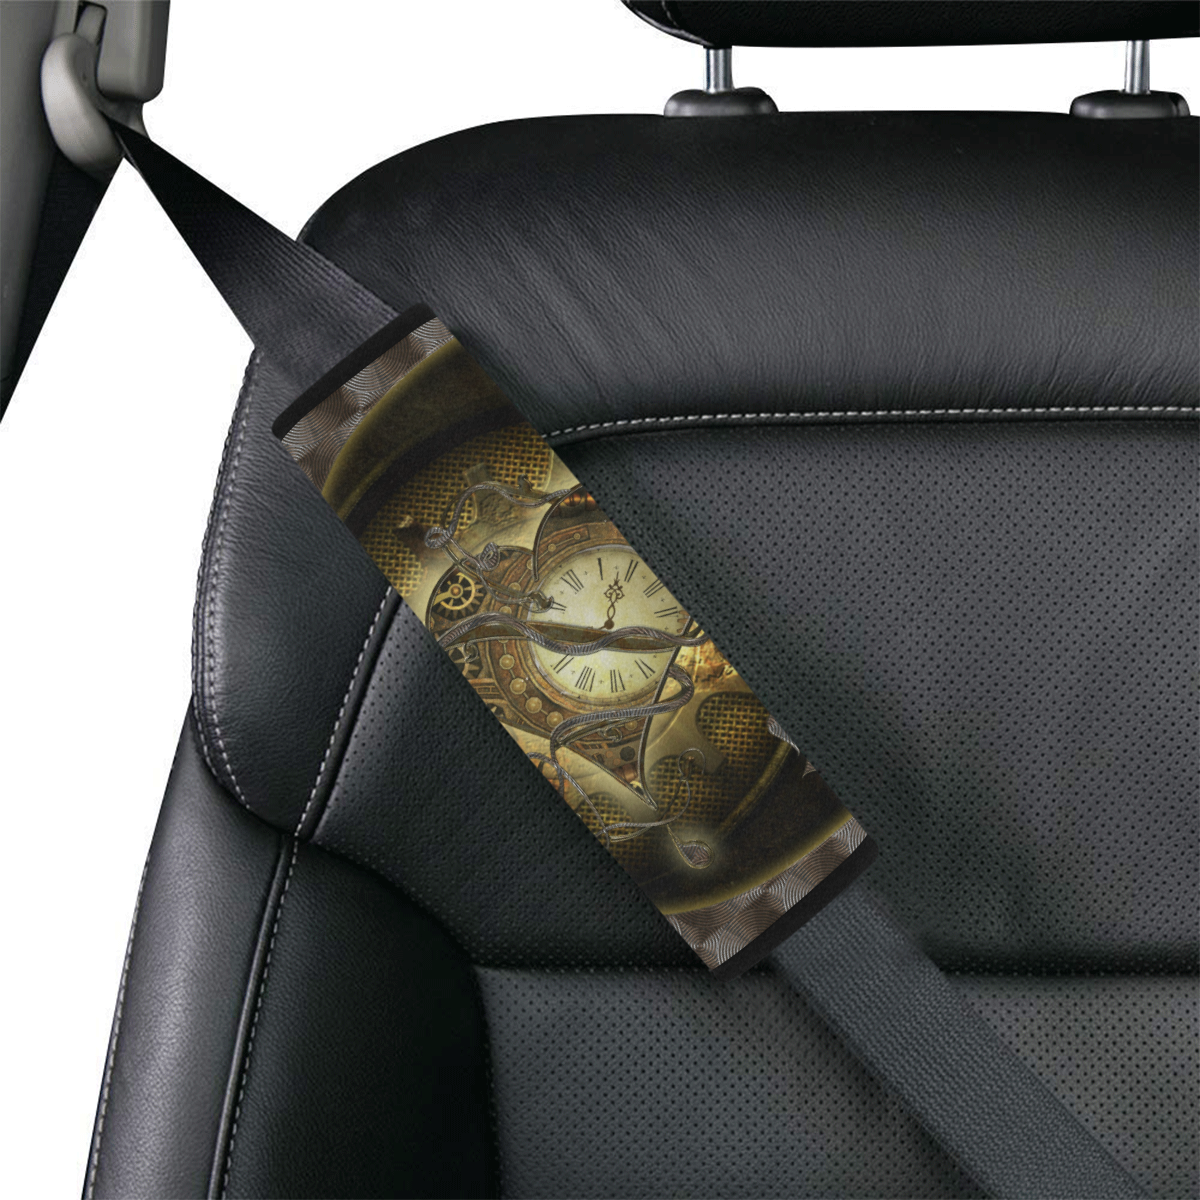 Awesome steampunk heart Car Seat Belt Cover 7''x8.5''